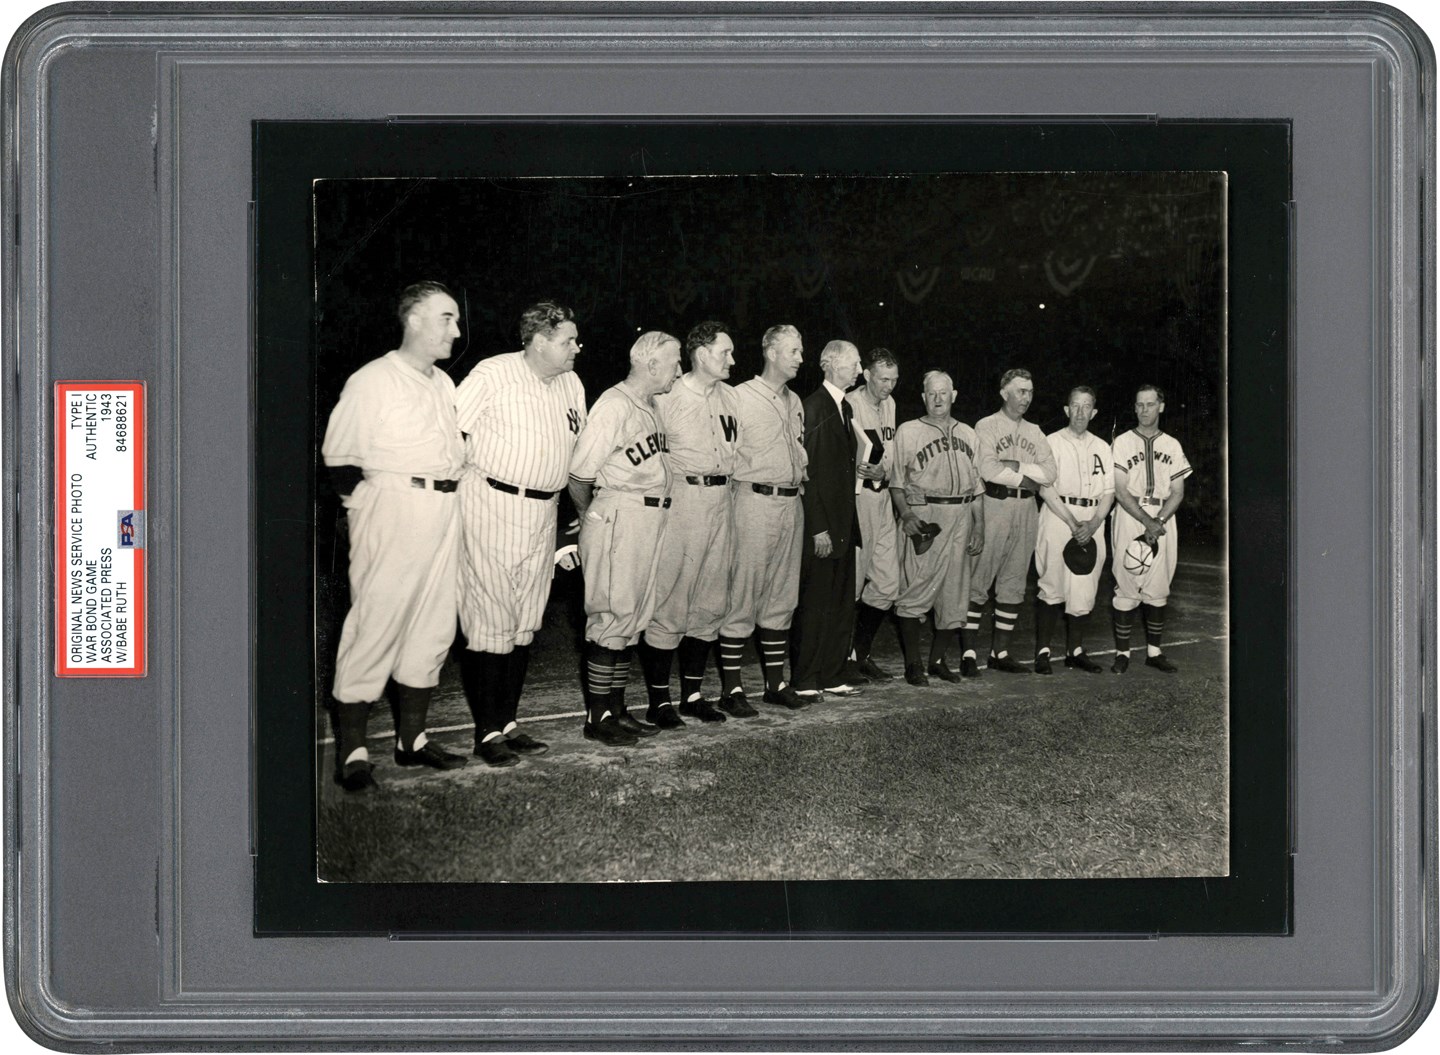 Vintage Sports Photographs - 1943 War Bond Game Photograph with Babe Ruth, Honus Wagner & Legendary Hall of Famers (PSA Type I)